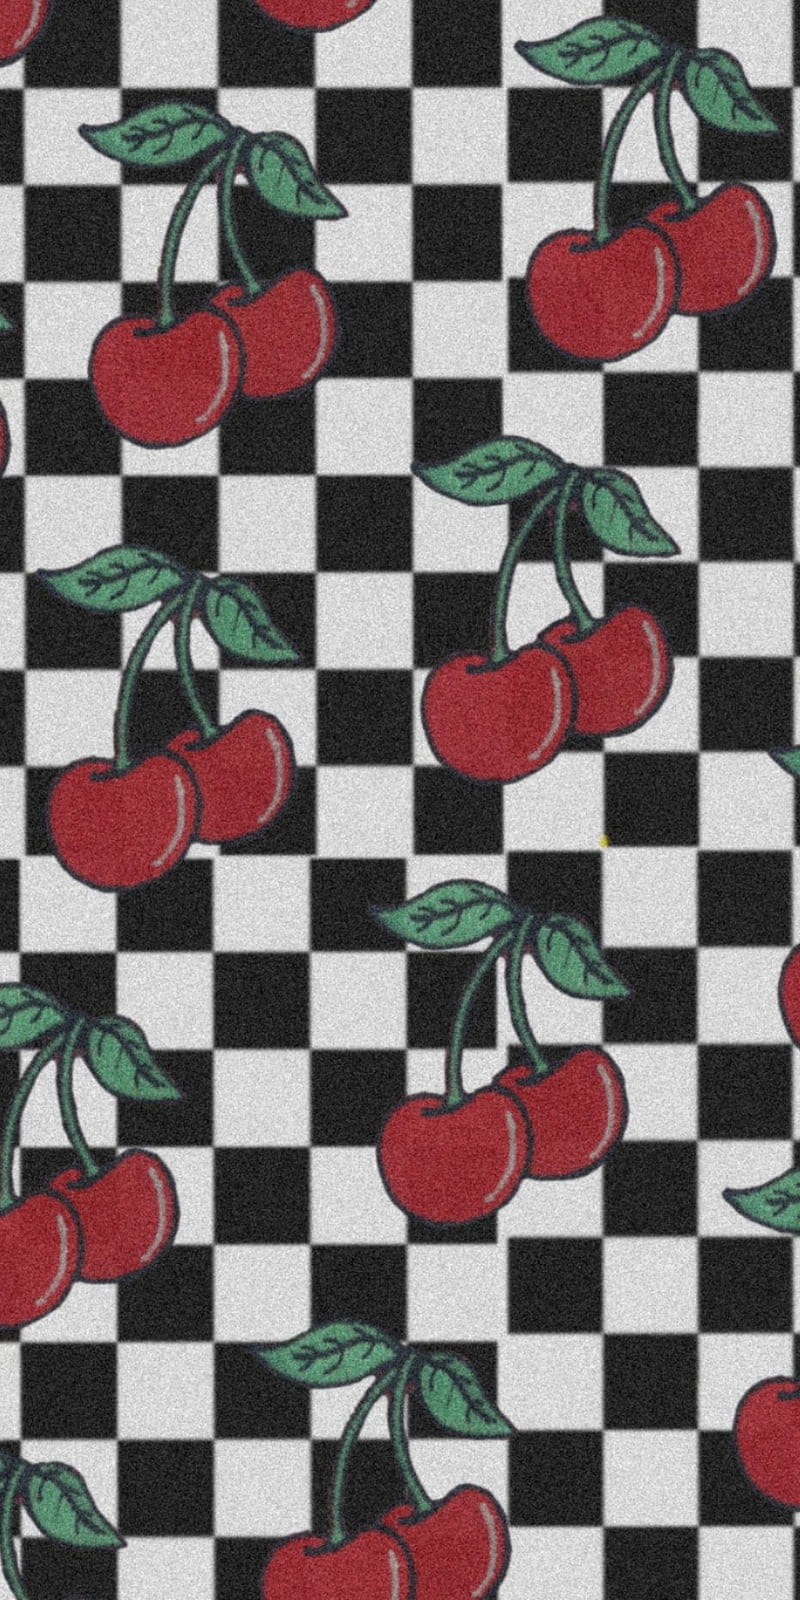 A pattern of red cherries on a black and white checkered background - Cherry